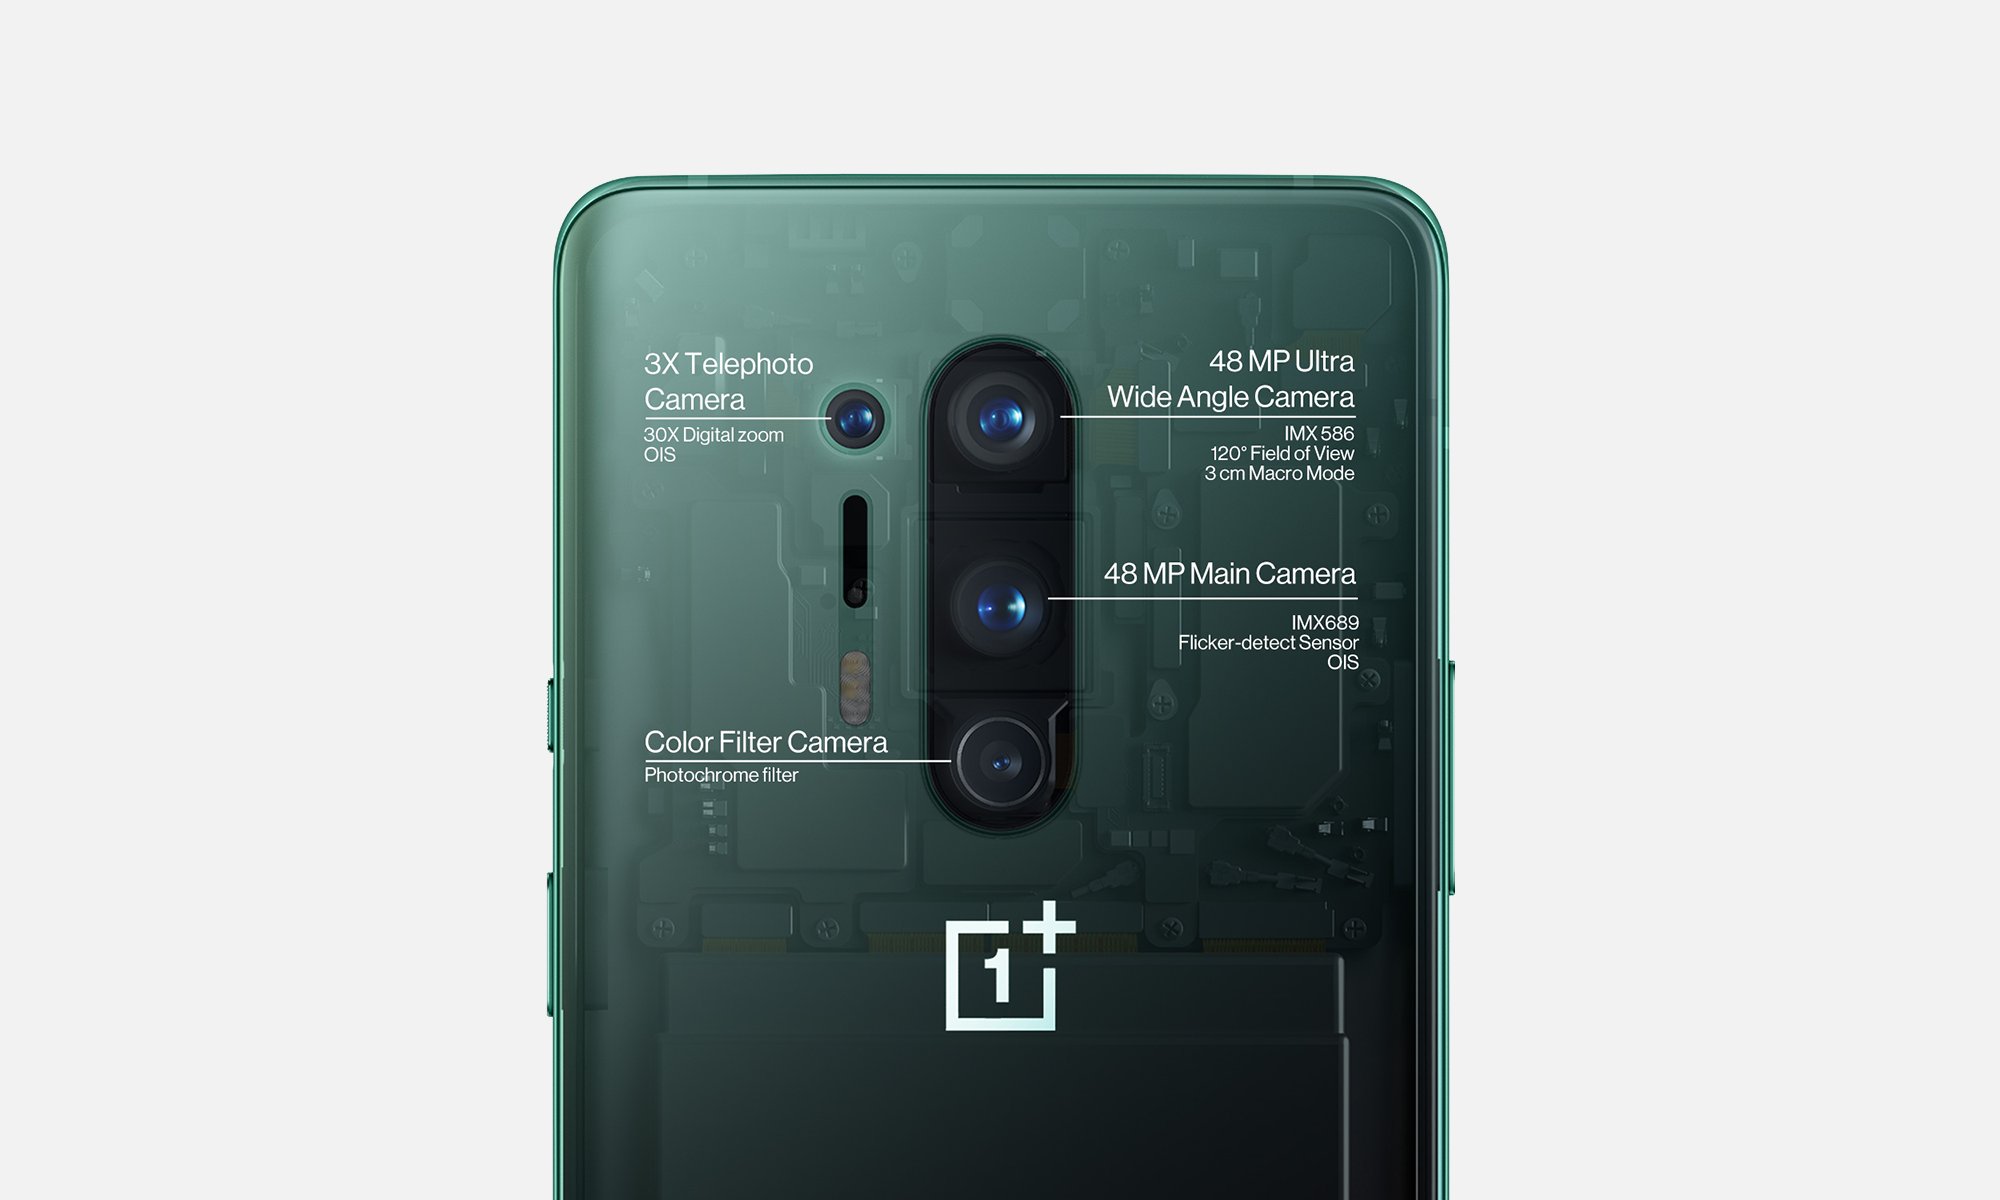 
OnePlus 8 Pro Full phone specifications, Preorder OnePlus8 Pro in India,Preorder OnePlus8 Pro in India,OnePlus 8 Pro youtube video,
OnePlus8 Pro Camera Features,OnePlus 8 Pro camera preview 